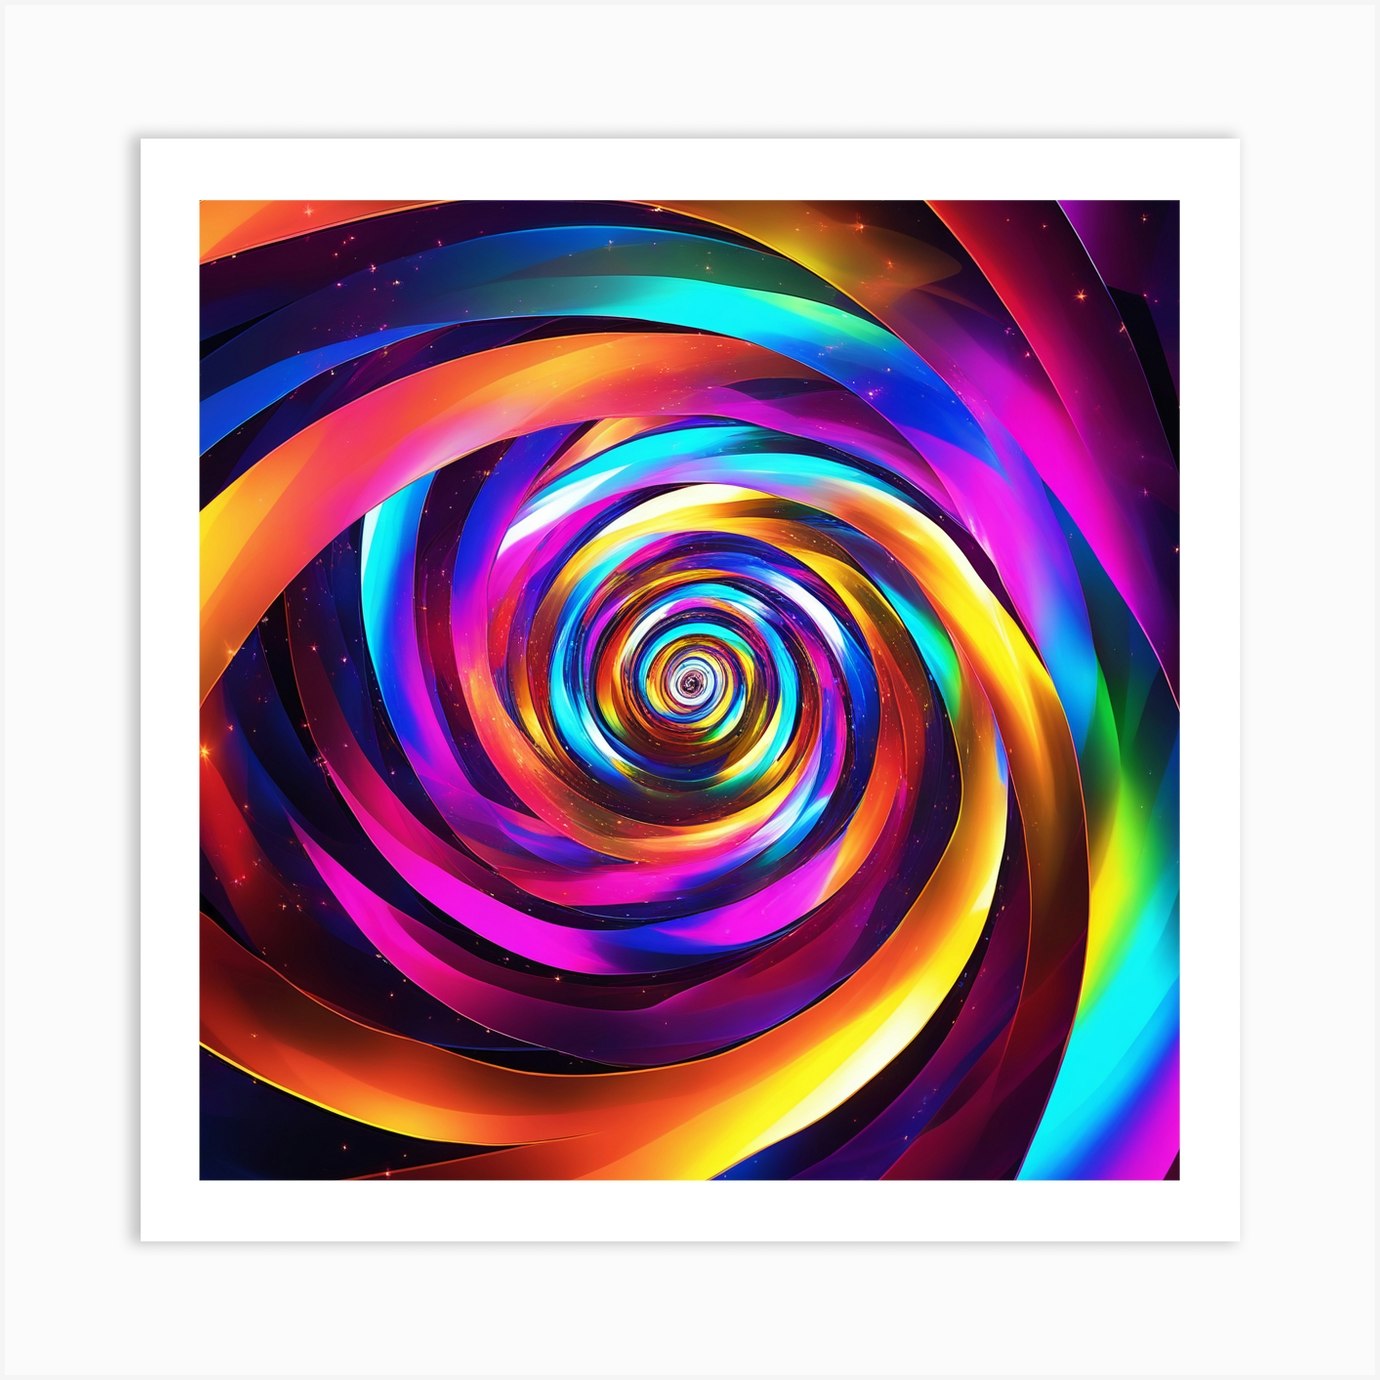 Multi colored circular spiral containing spiral, art, and background